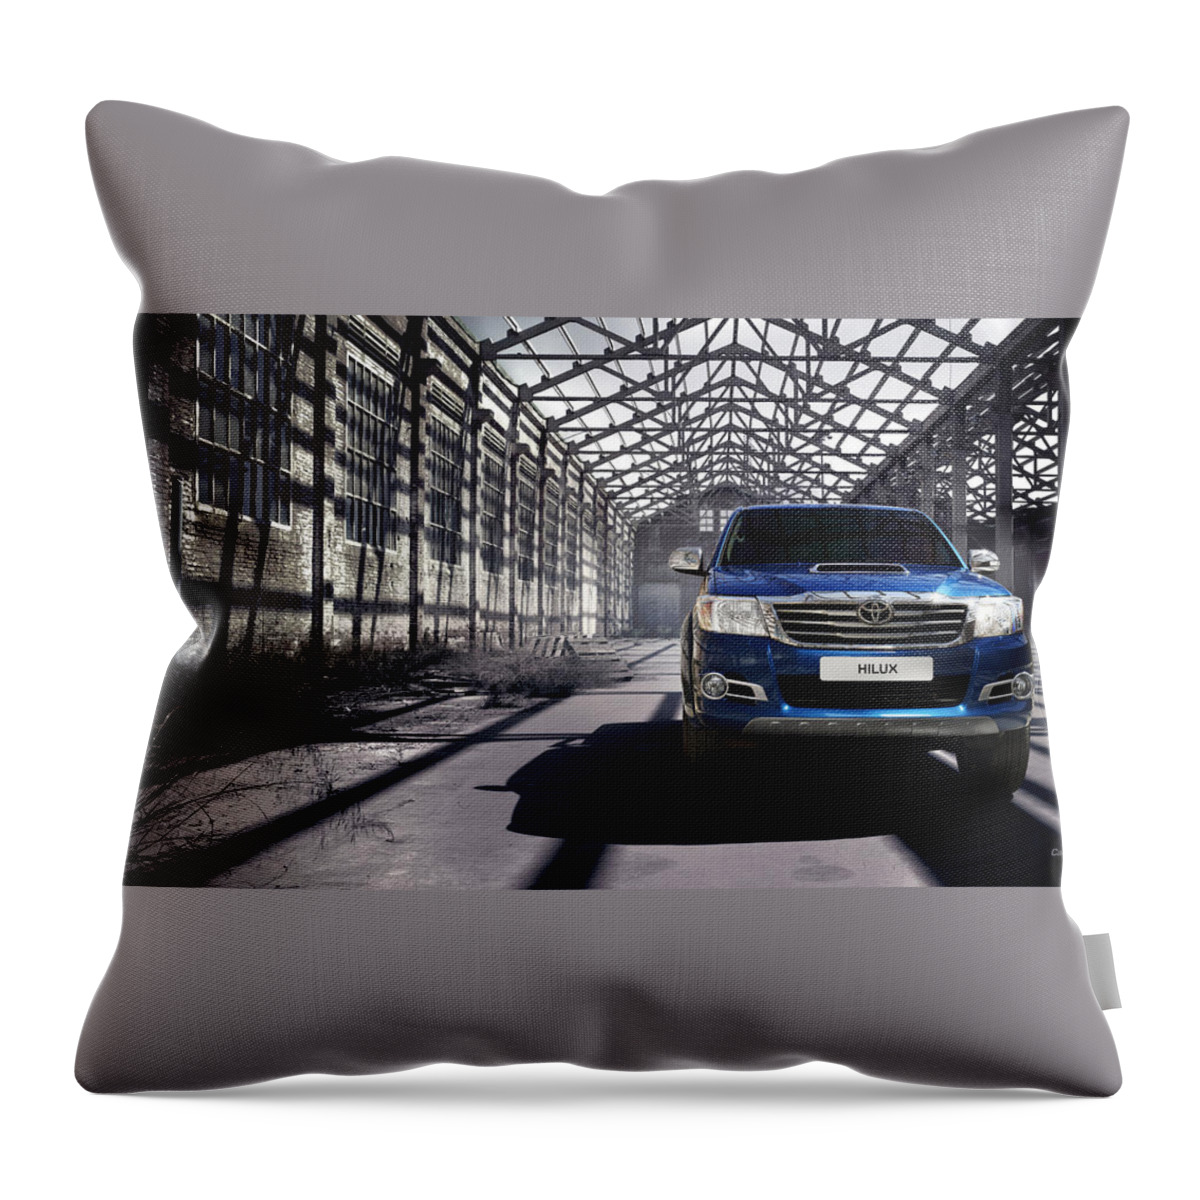 Toyota Hilux Throw Pillow featuring the digital art Toyota Hilux by Super Lovely